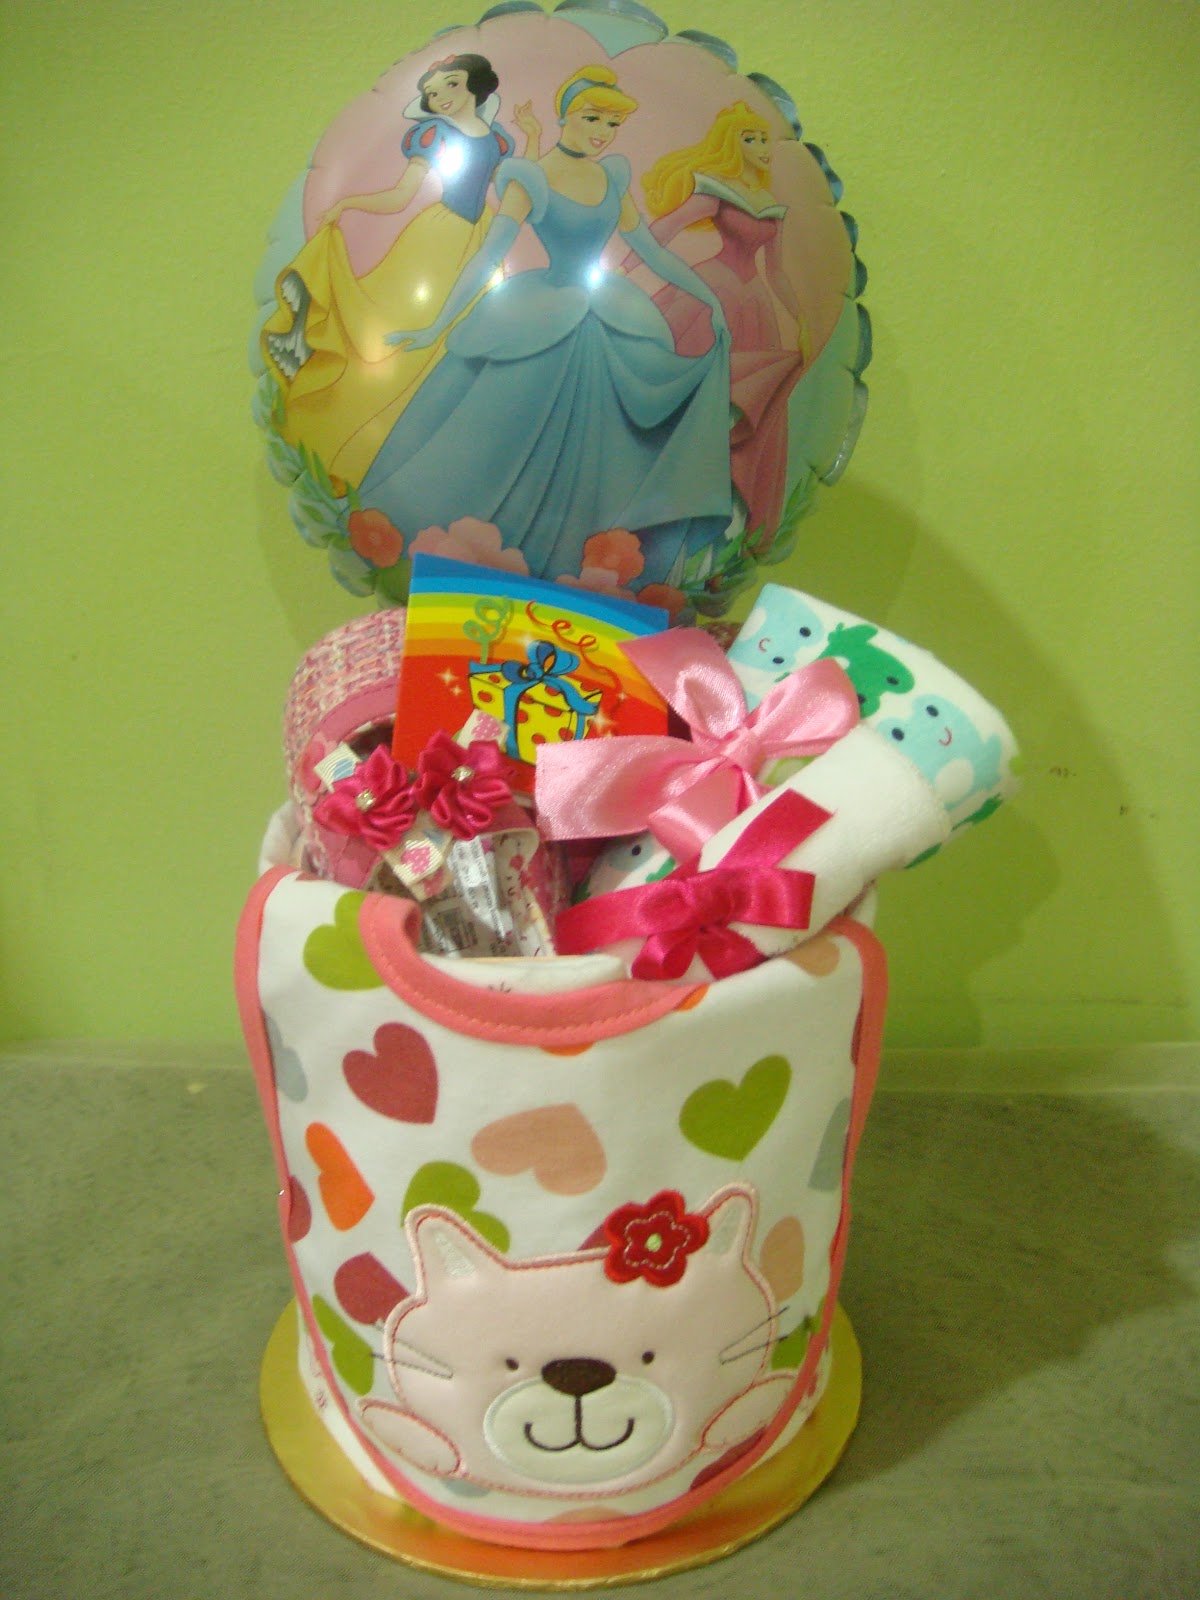 Small Diaper Cakes with Balloons